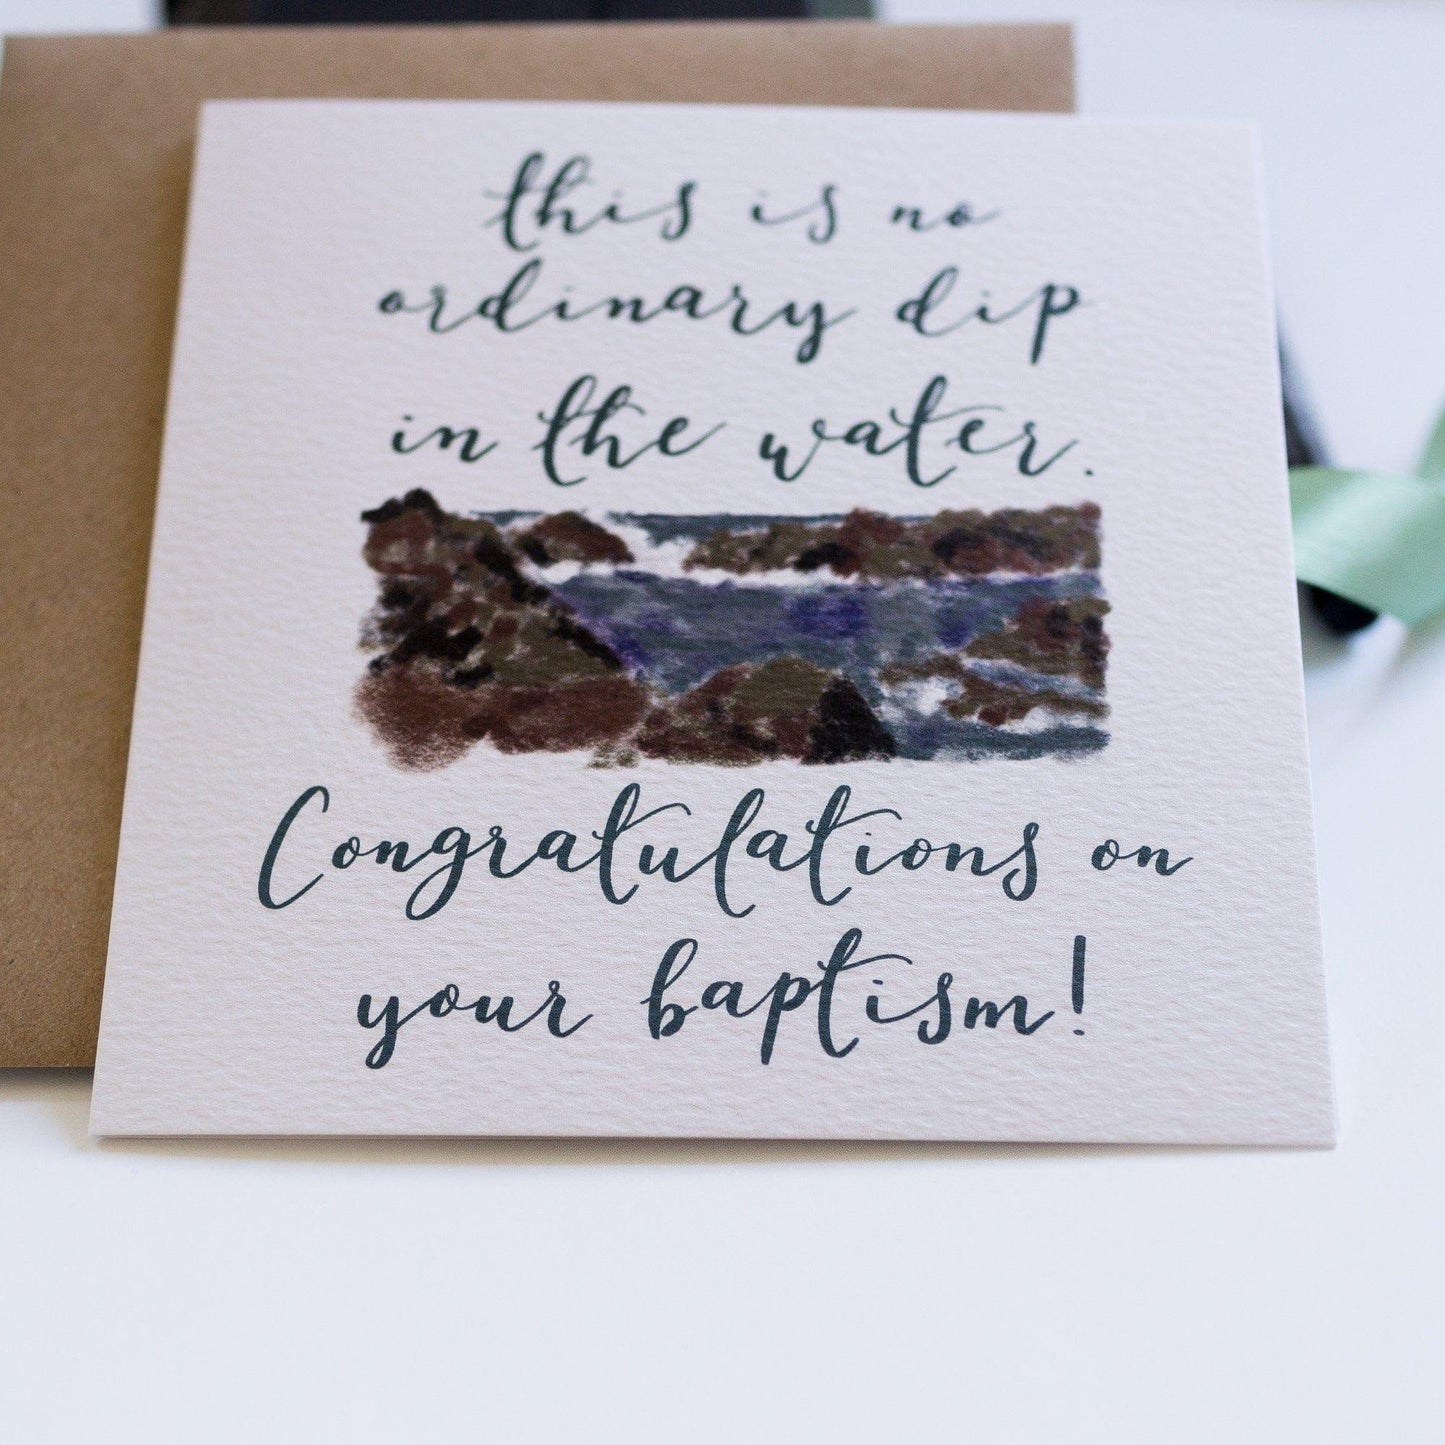 “No ordinary dip in the water” baptism card And Hope Designs Cards